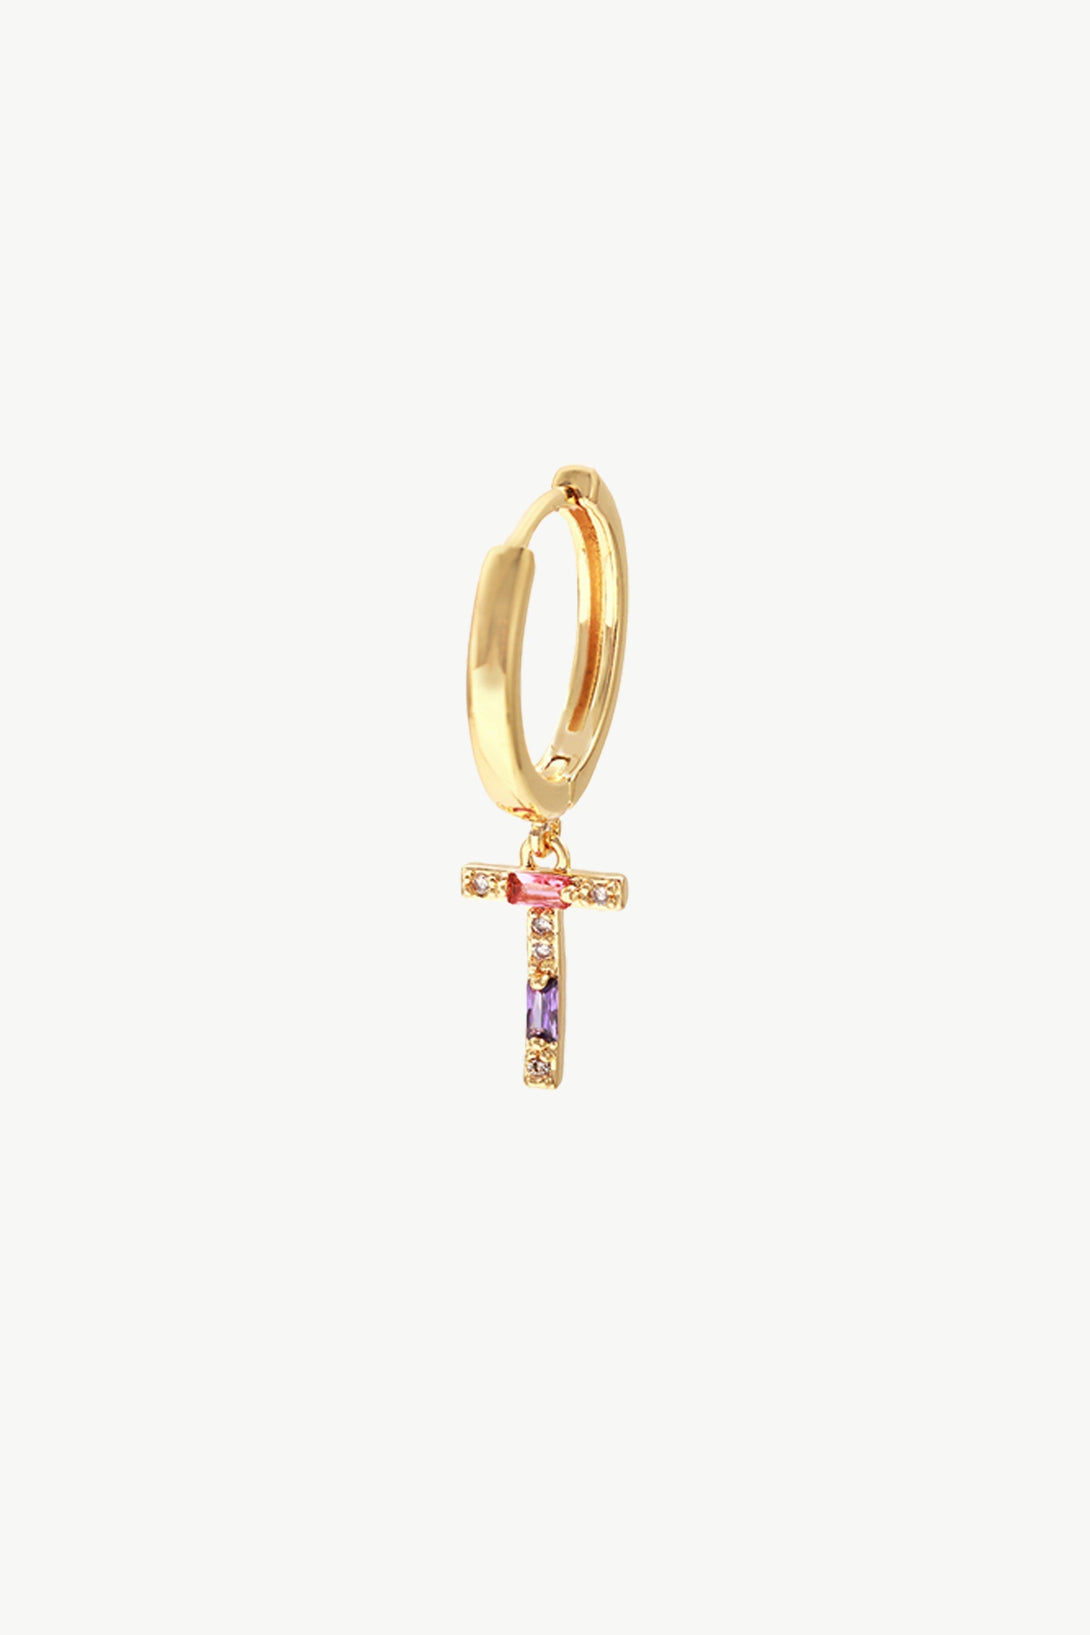 Single Gold Pavé Initial Charm Drop Huggie Hoop Earring-Letter T - Classicharms